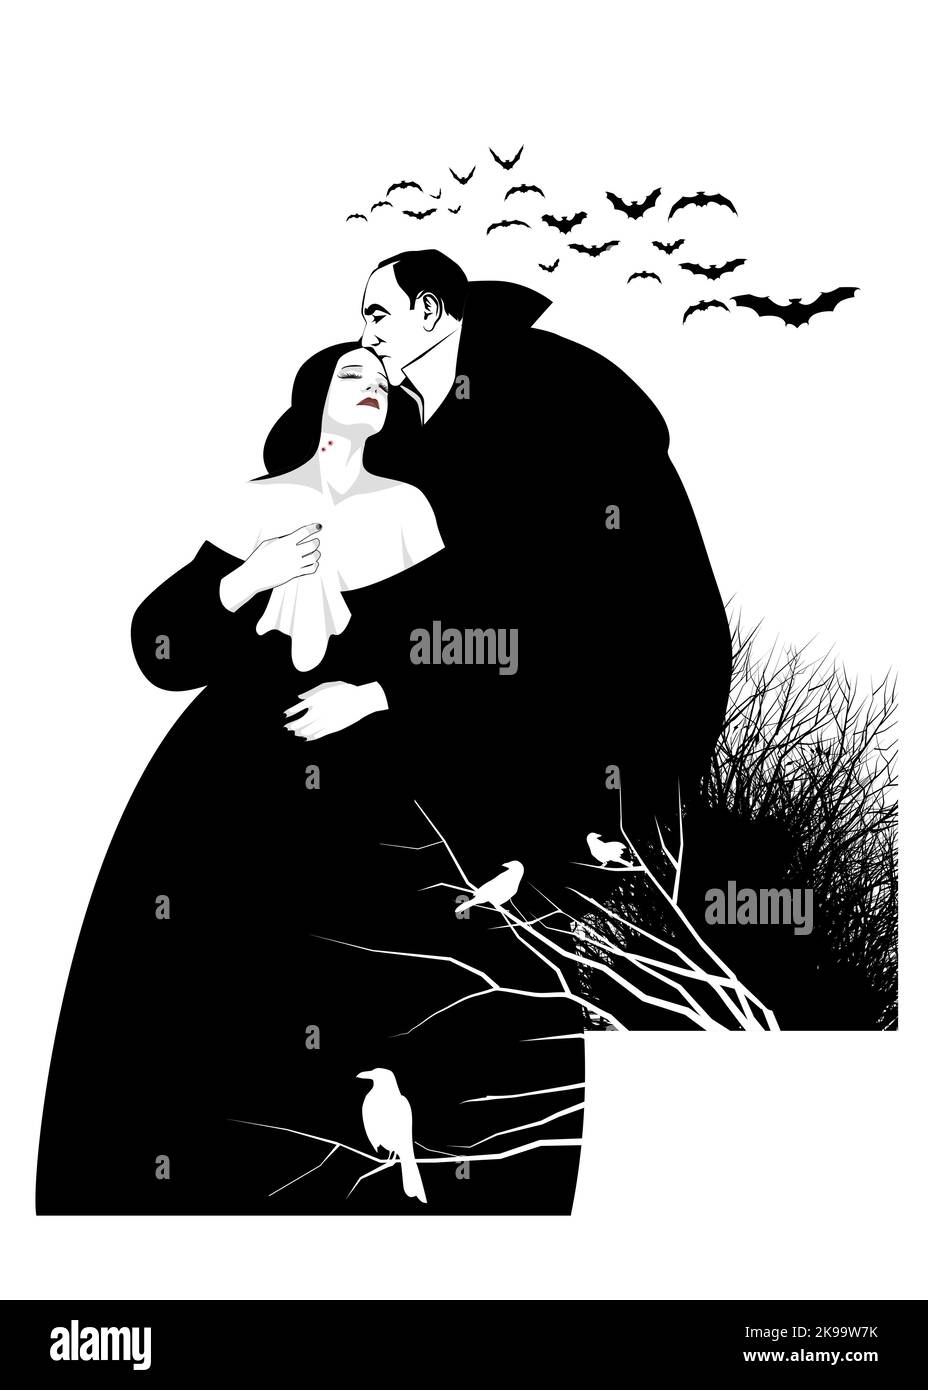 Man with cape tenderly kissing a lady on the forehead. Lady with fang wounds and on her neck. Bats flying. Silhouette of dry branches and ravens on th Stock Vector